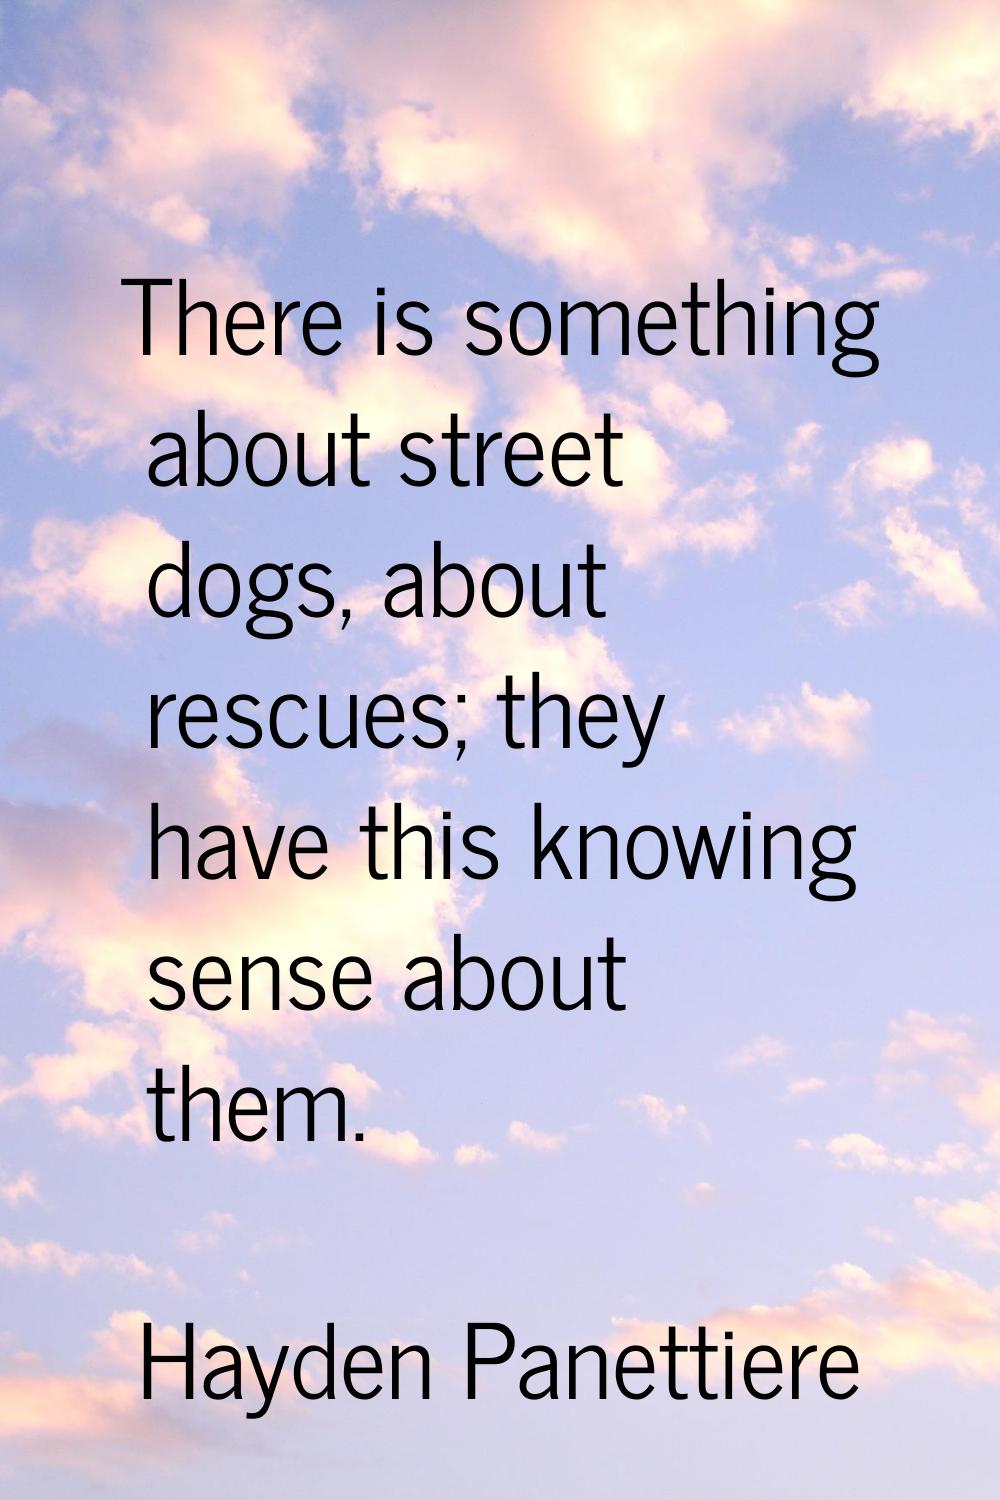 There is something about street dogs, about rescues; they have this knowing sense about them.